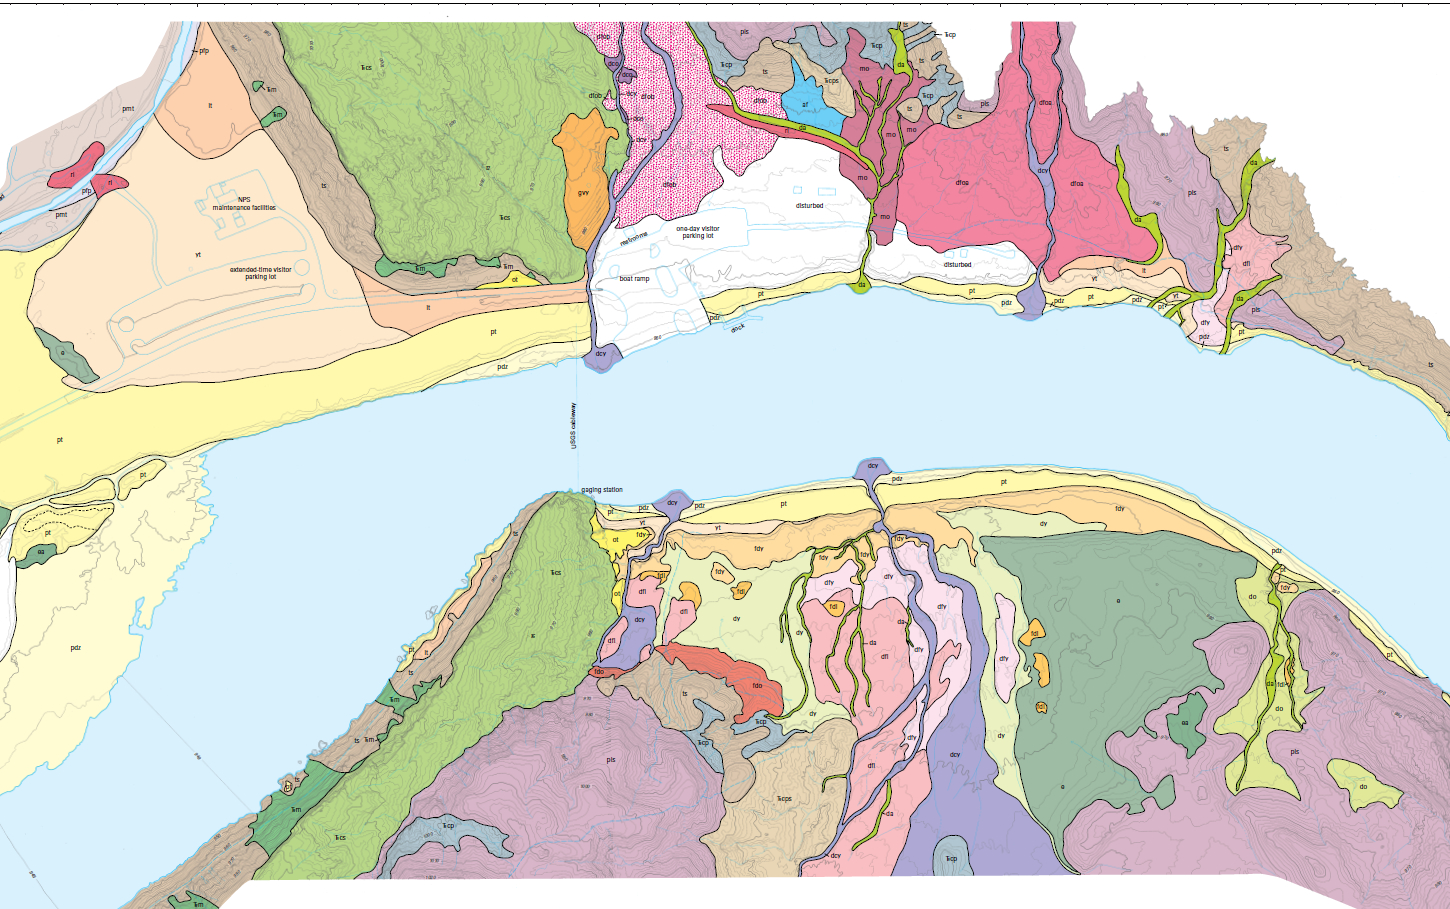 Geology of Lees Ferry (map), Colorado River, northern Arizona | AZGS